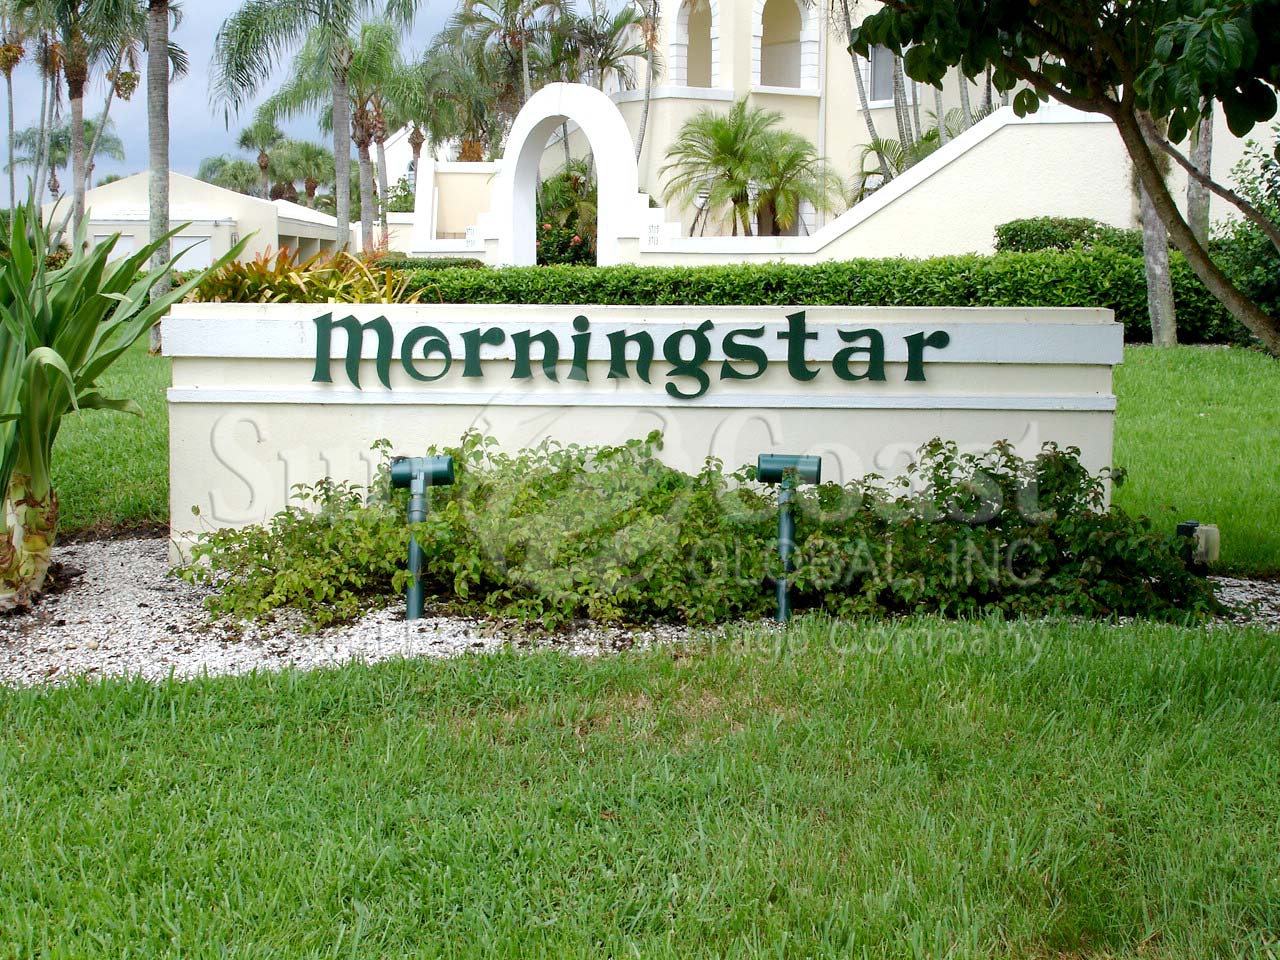 Morningstar at Windstar sign to non gated community within gated community of Windstar